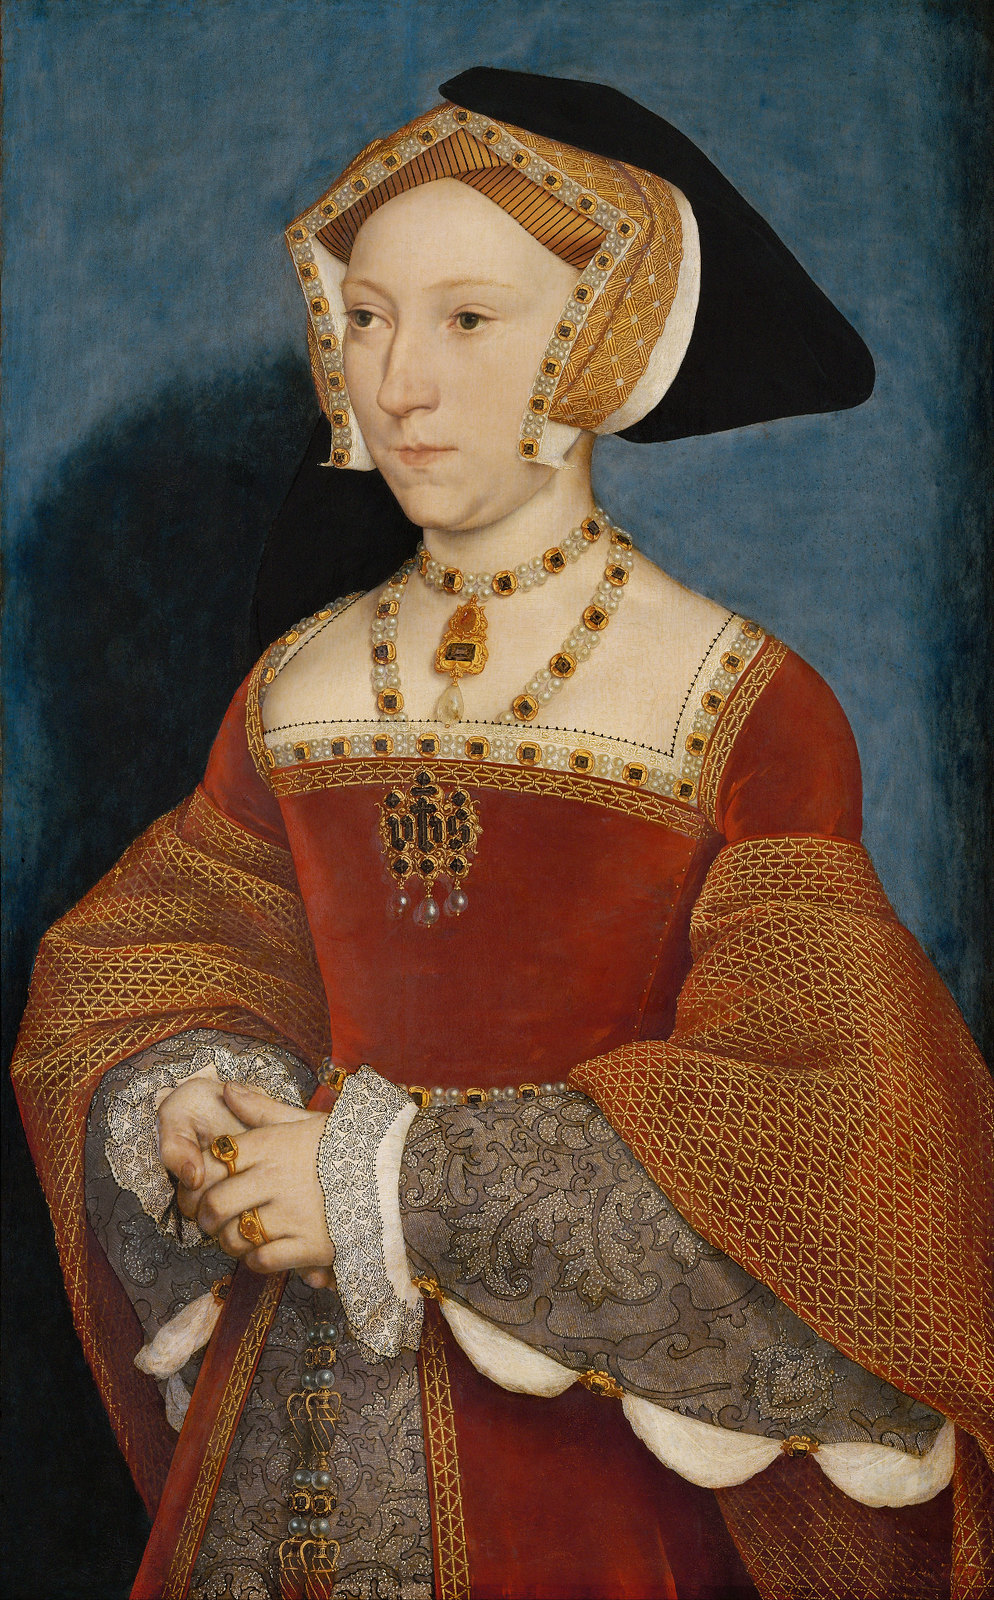 Jane Seymour, Queen of England by Hans Holbein the Younger, 1536